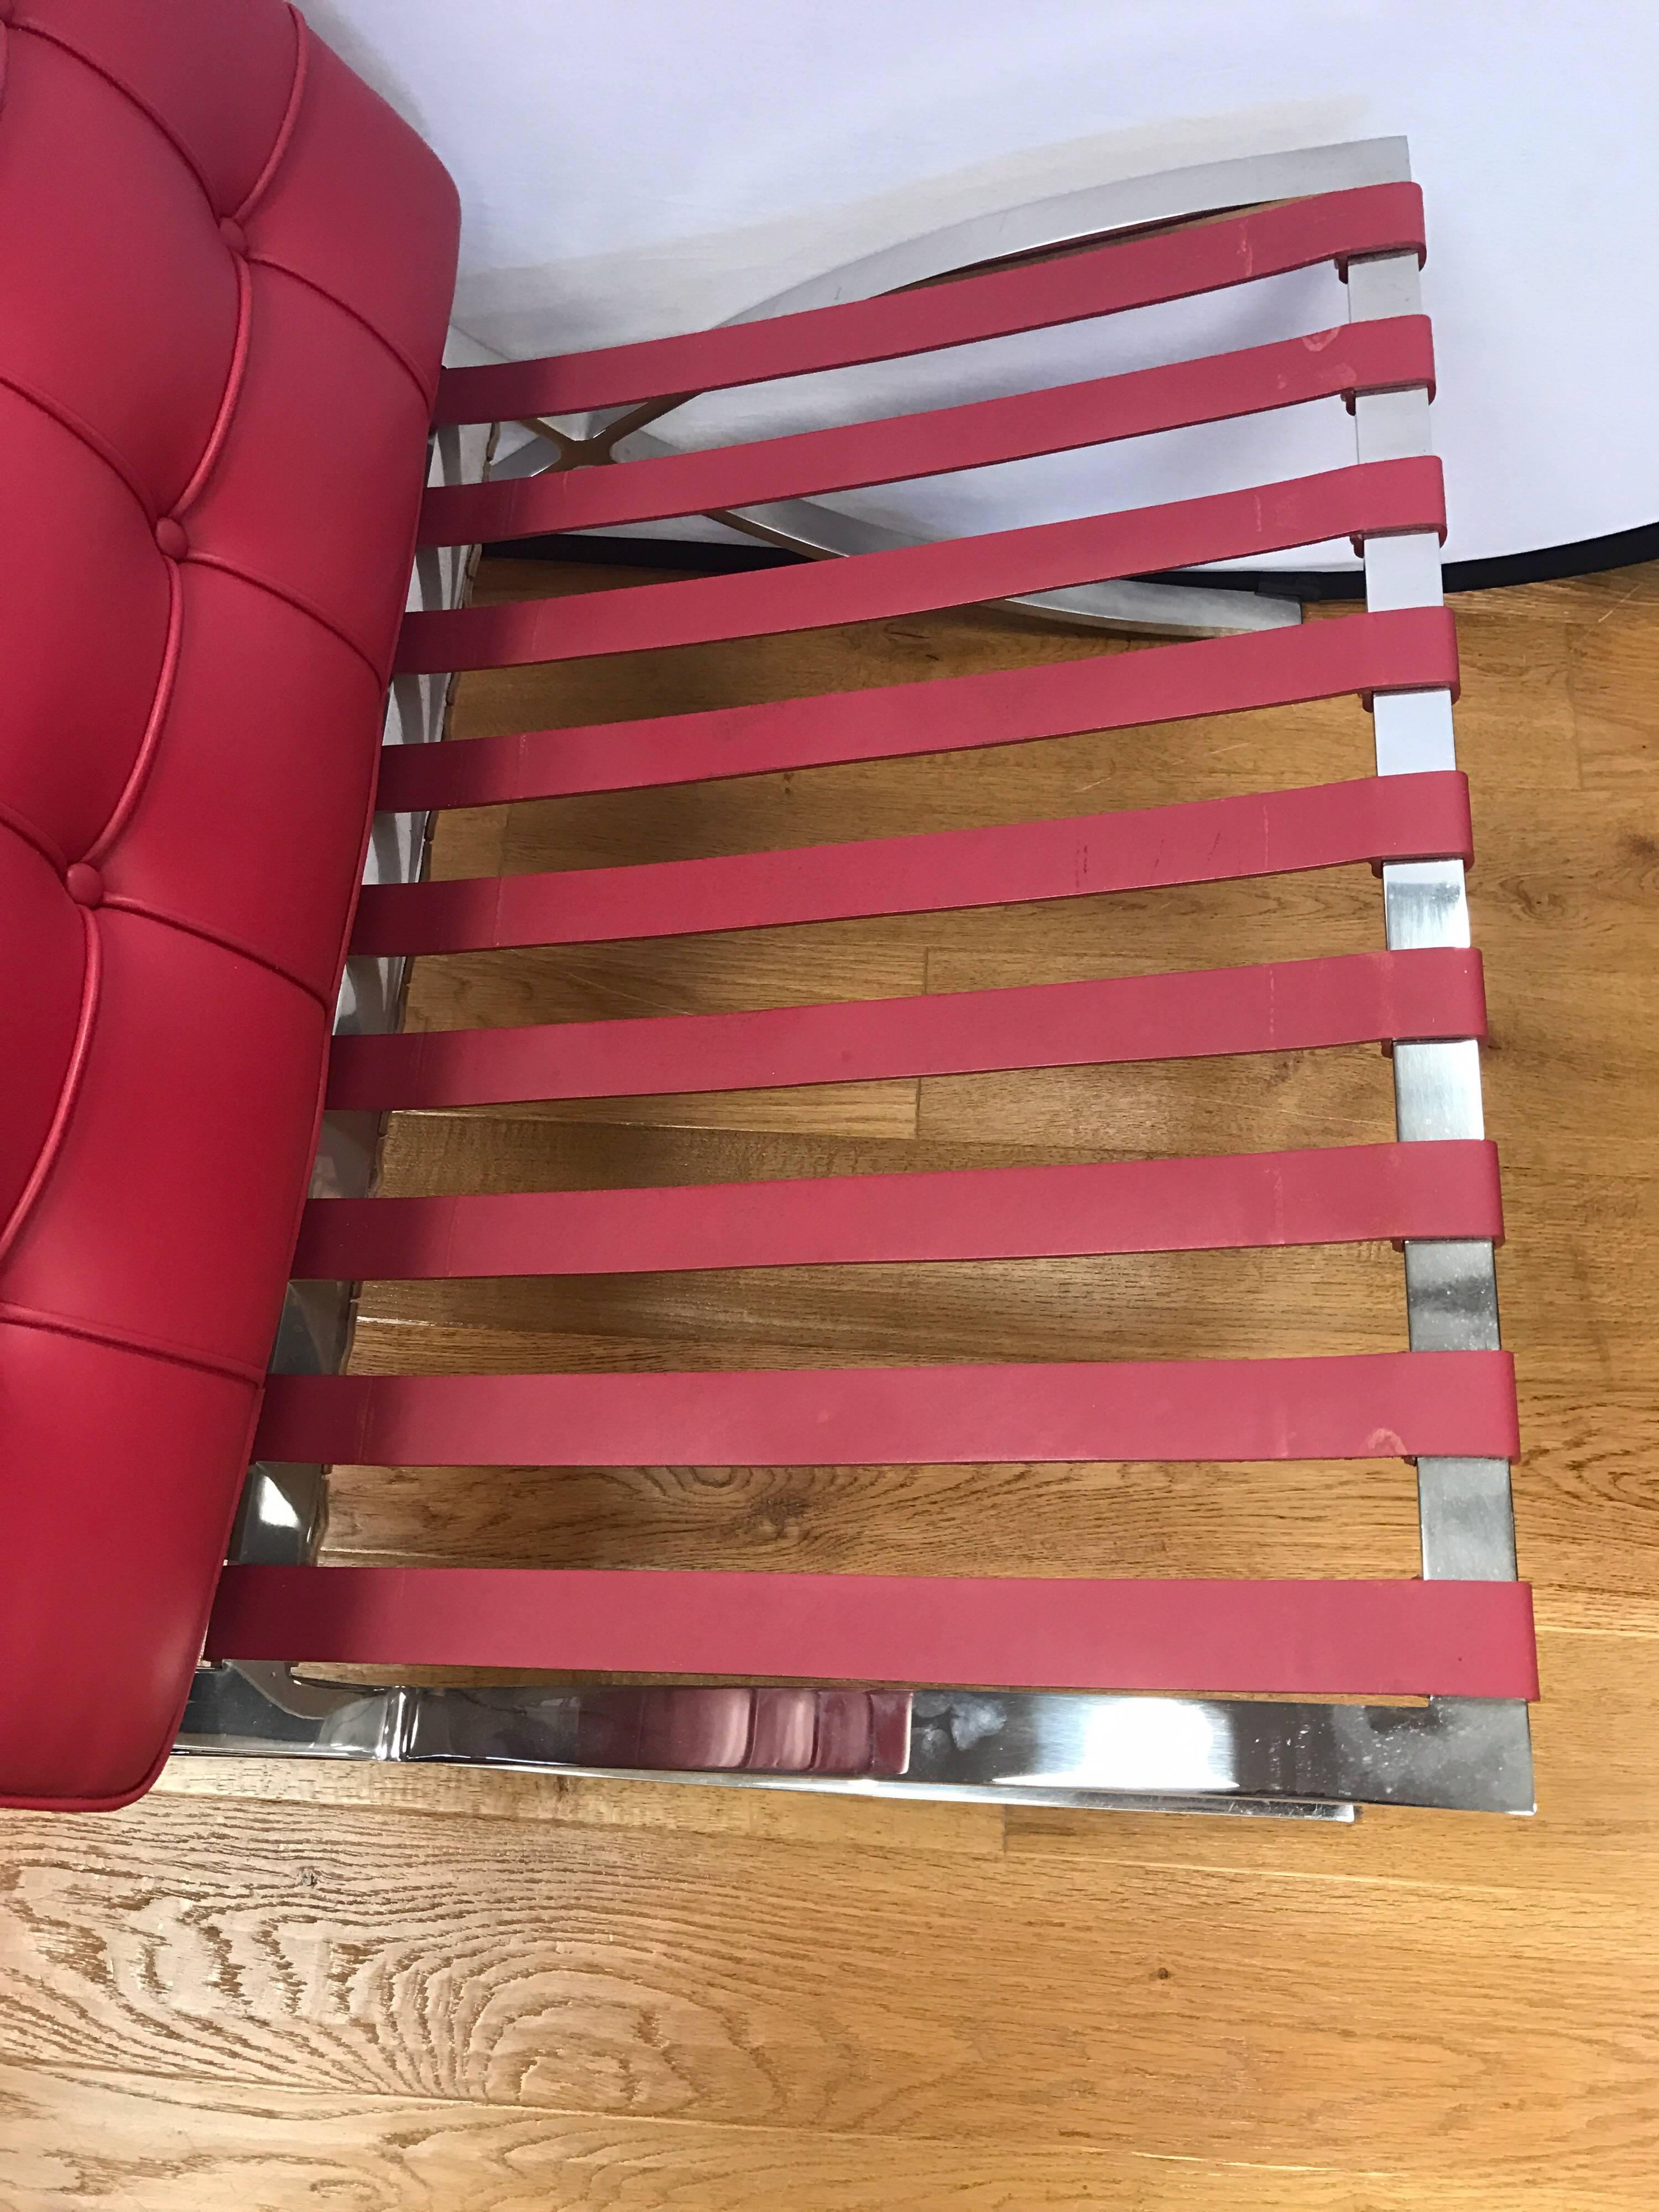 Steel Knoll Signed Rare Magenta Colored Leather Barcelona Chair Mies van der Rohe